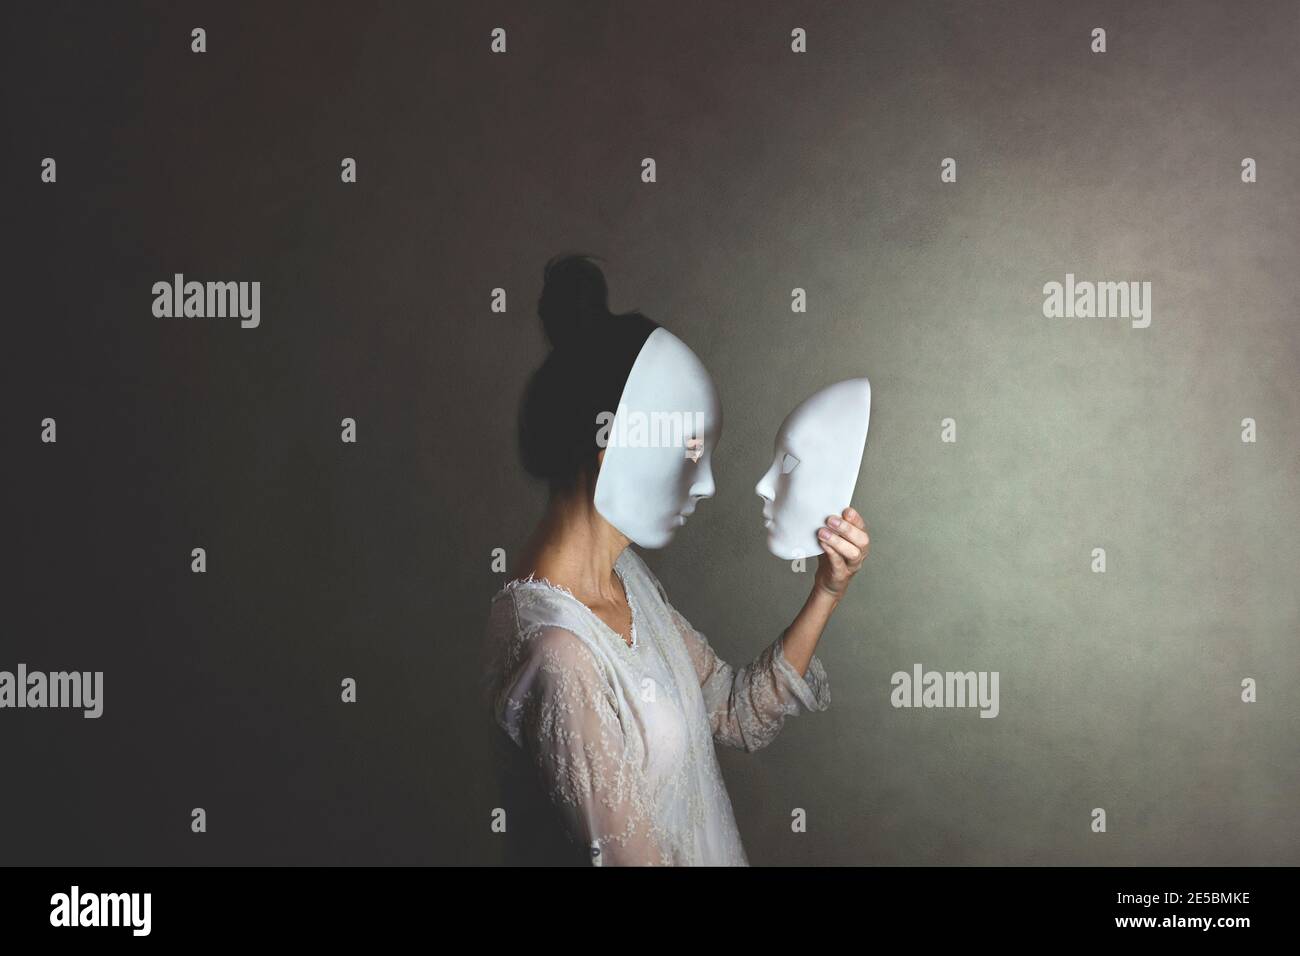 woman with mask looks at another mask of herself, concept of introspection Stock Photo